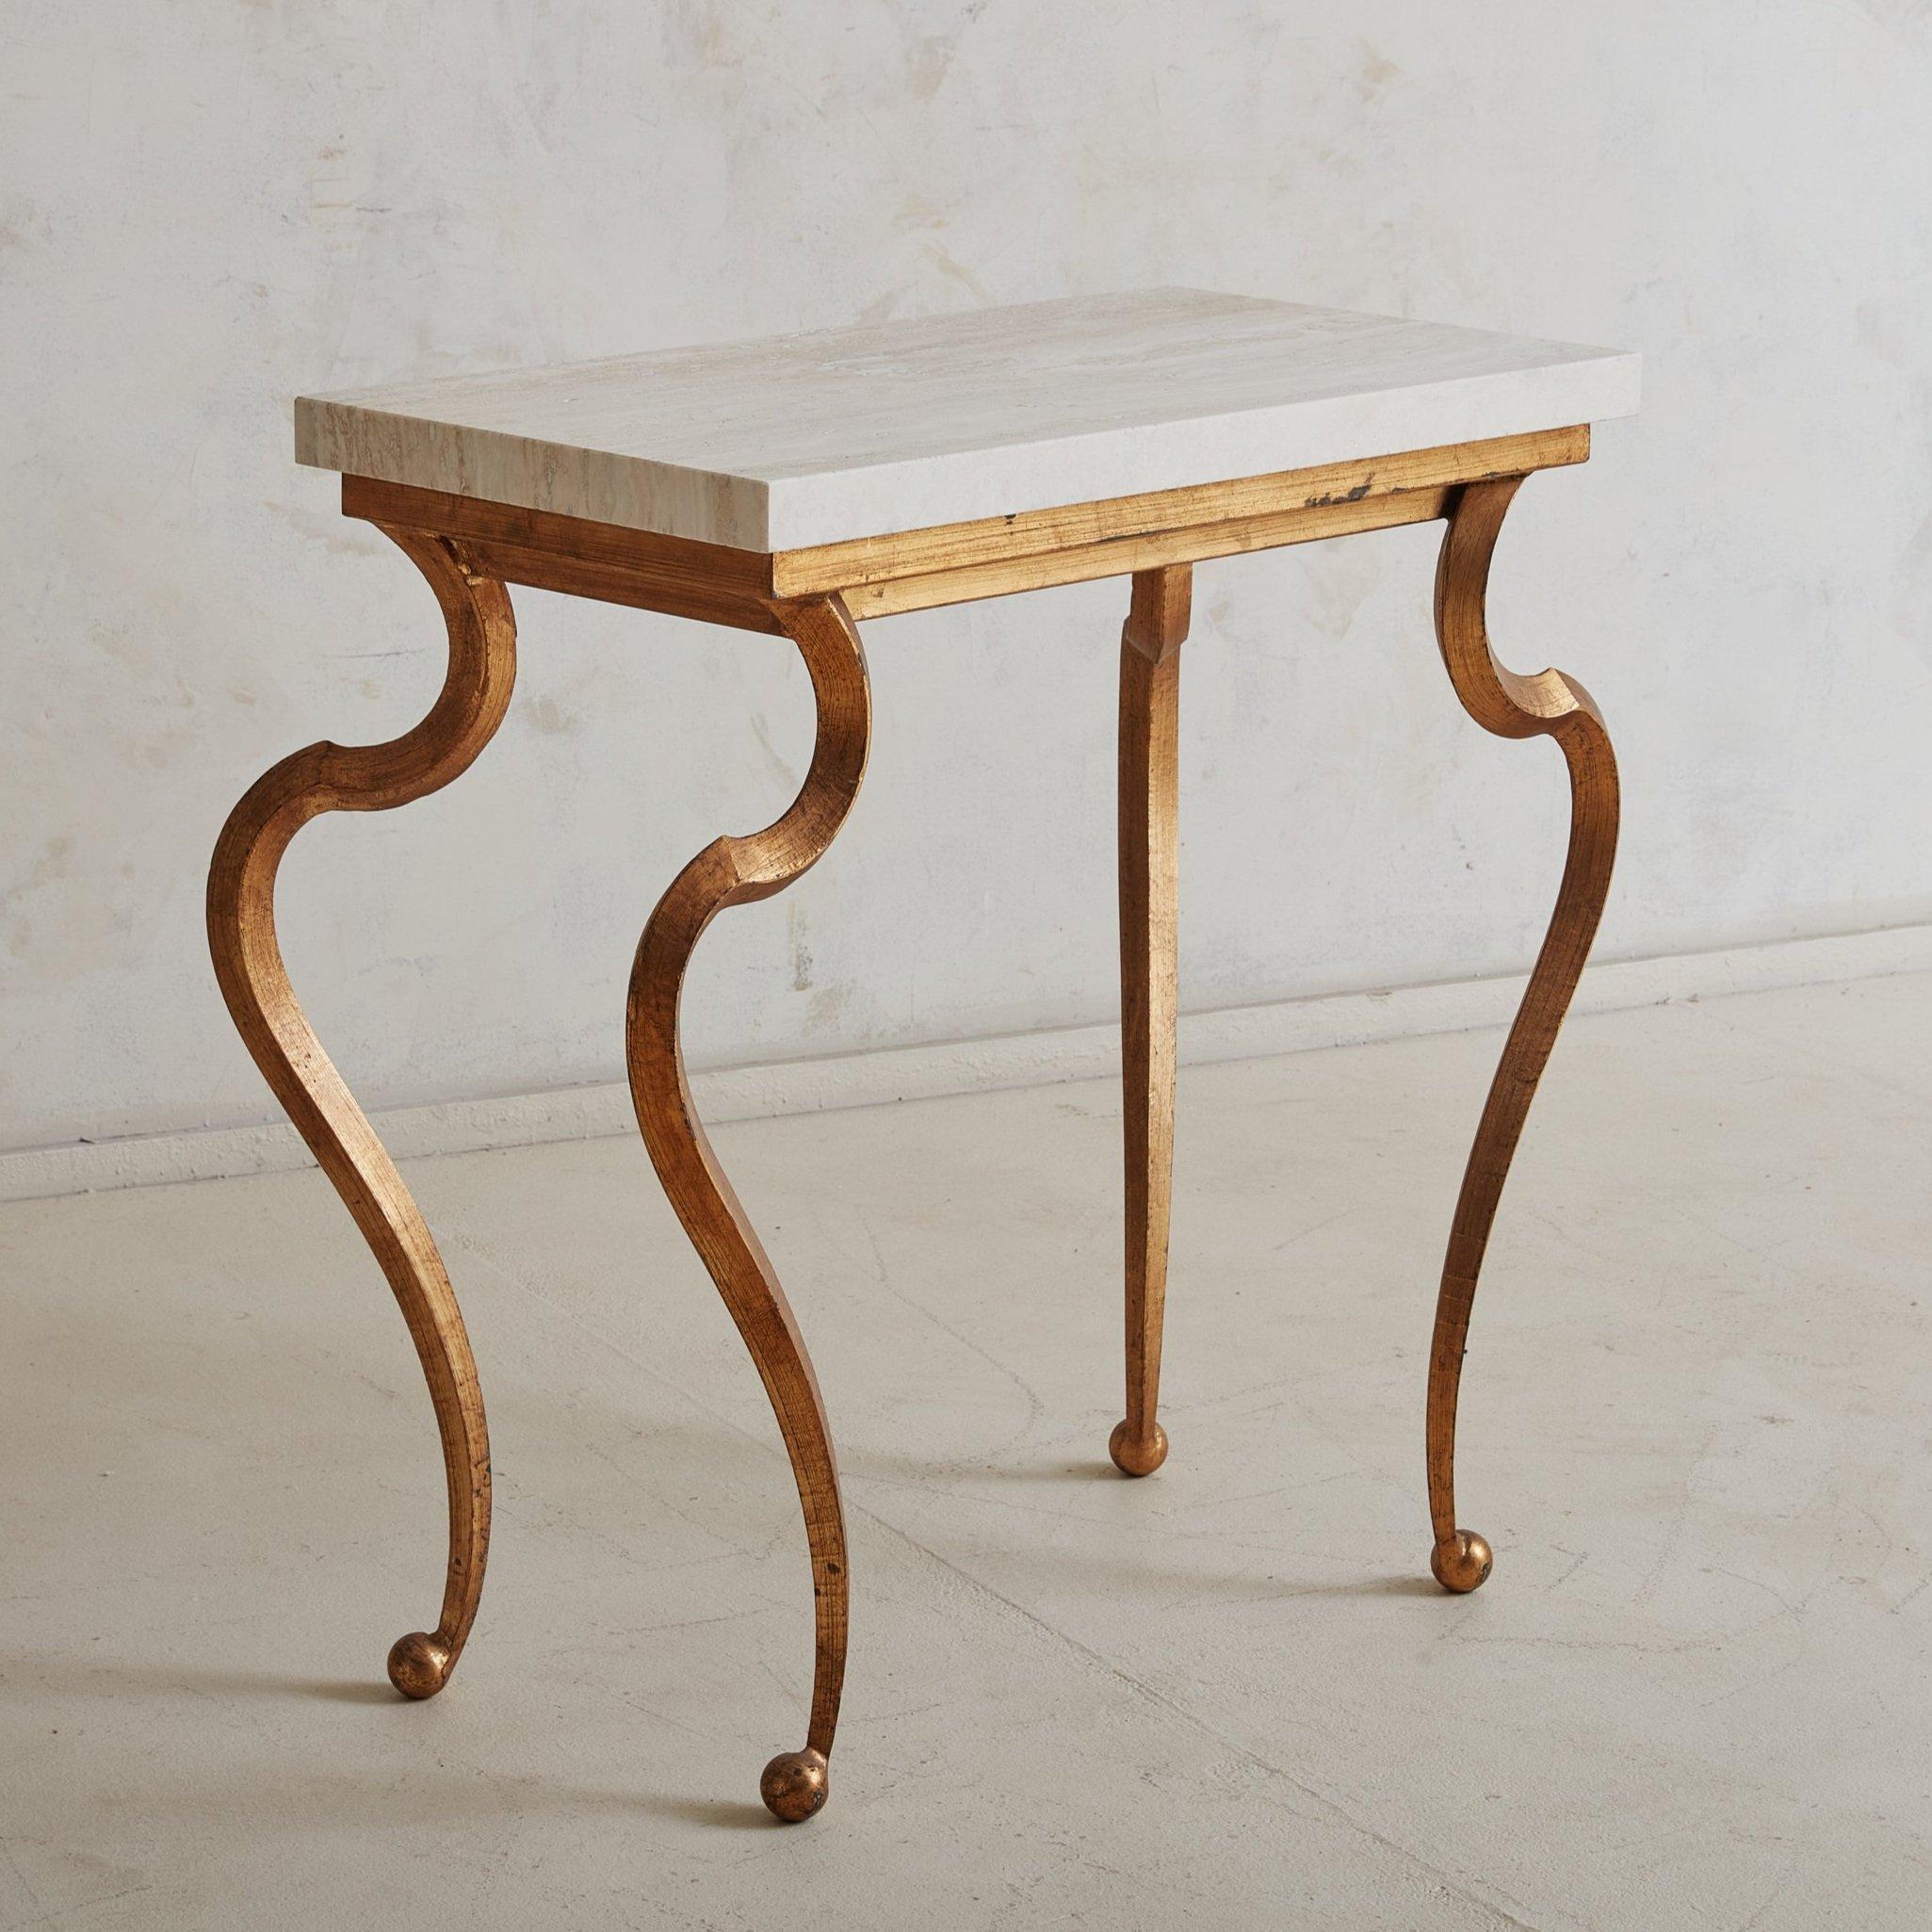 A vintage French console table featuring a gold painted bronze base with dramatically curved cabriole legs and petite ball feet. This piece has a thick rectangular travertine top with gorgeous movement in a range of taupe hues. We can envision this